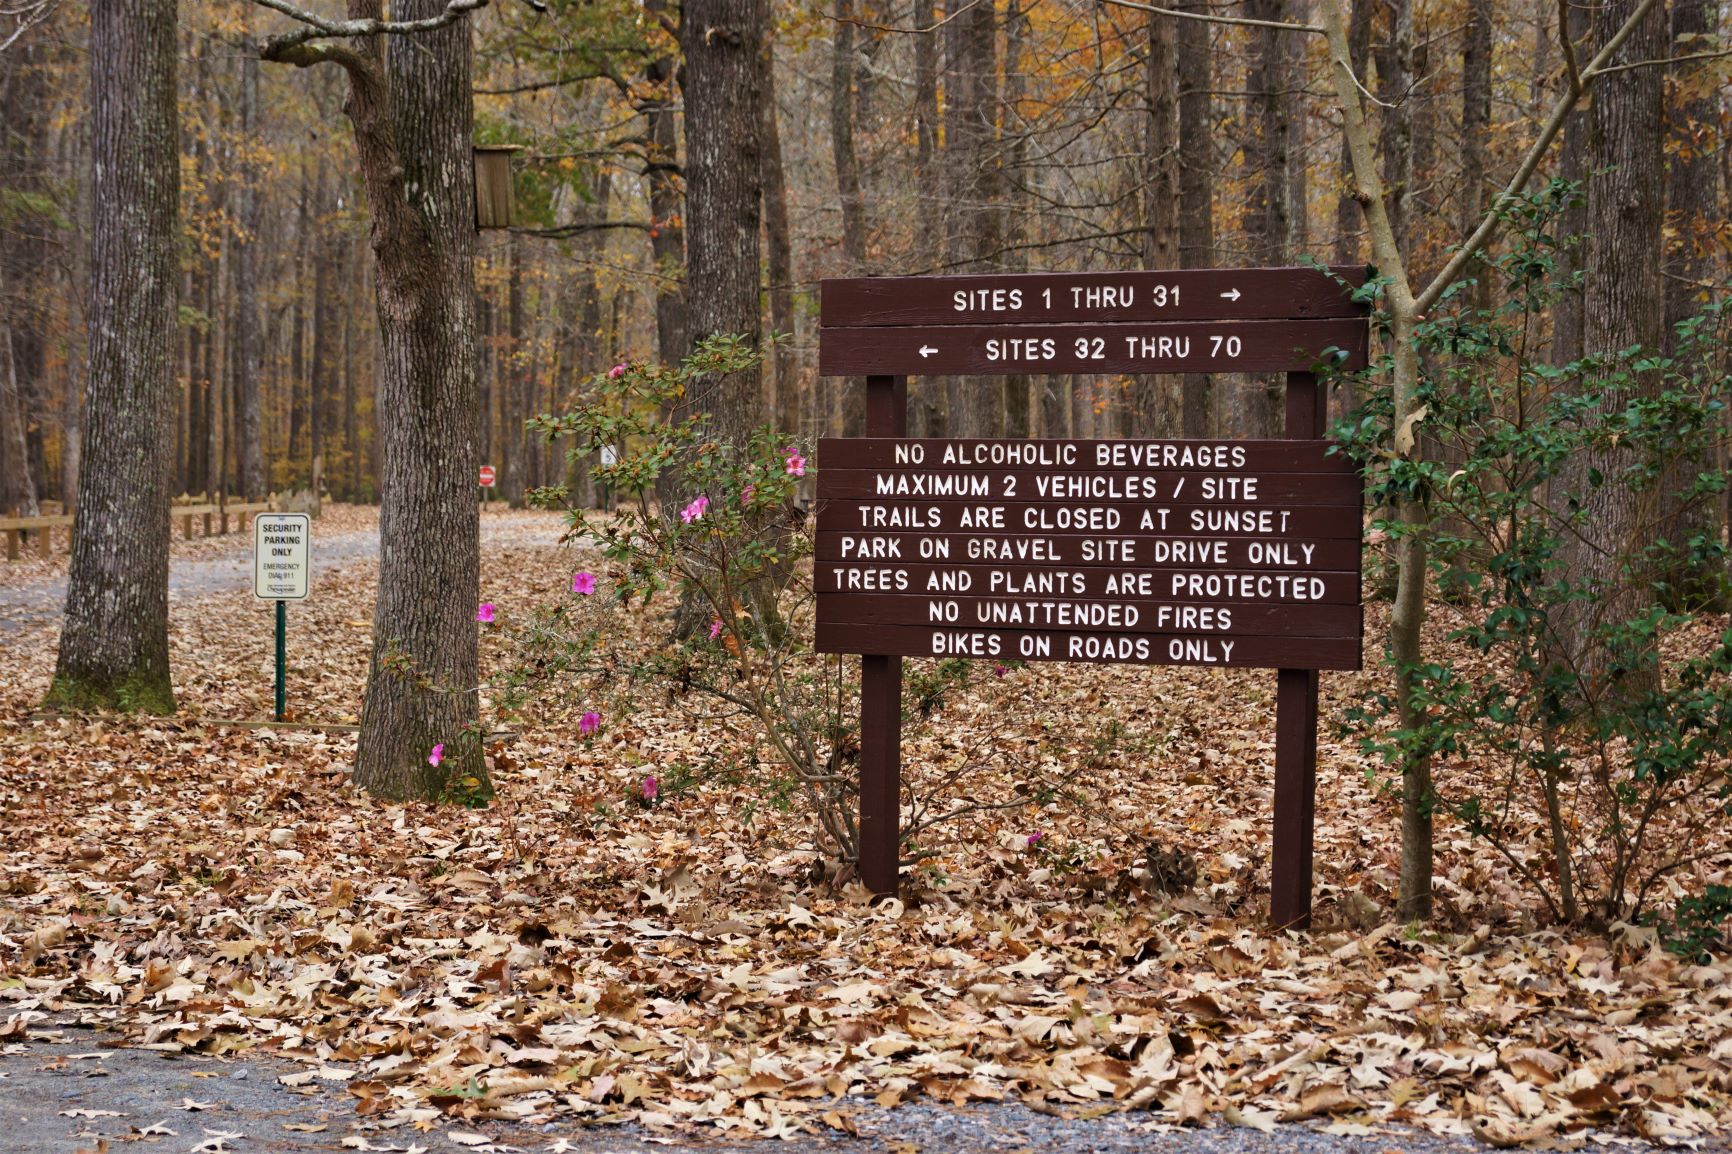 Camping Rules for Northwest River Park